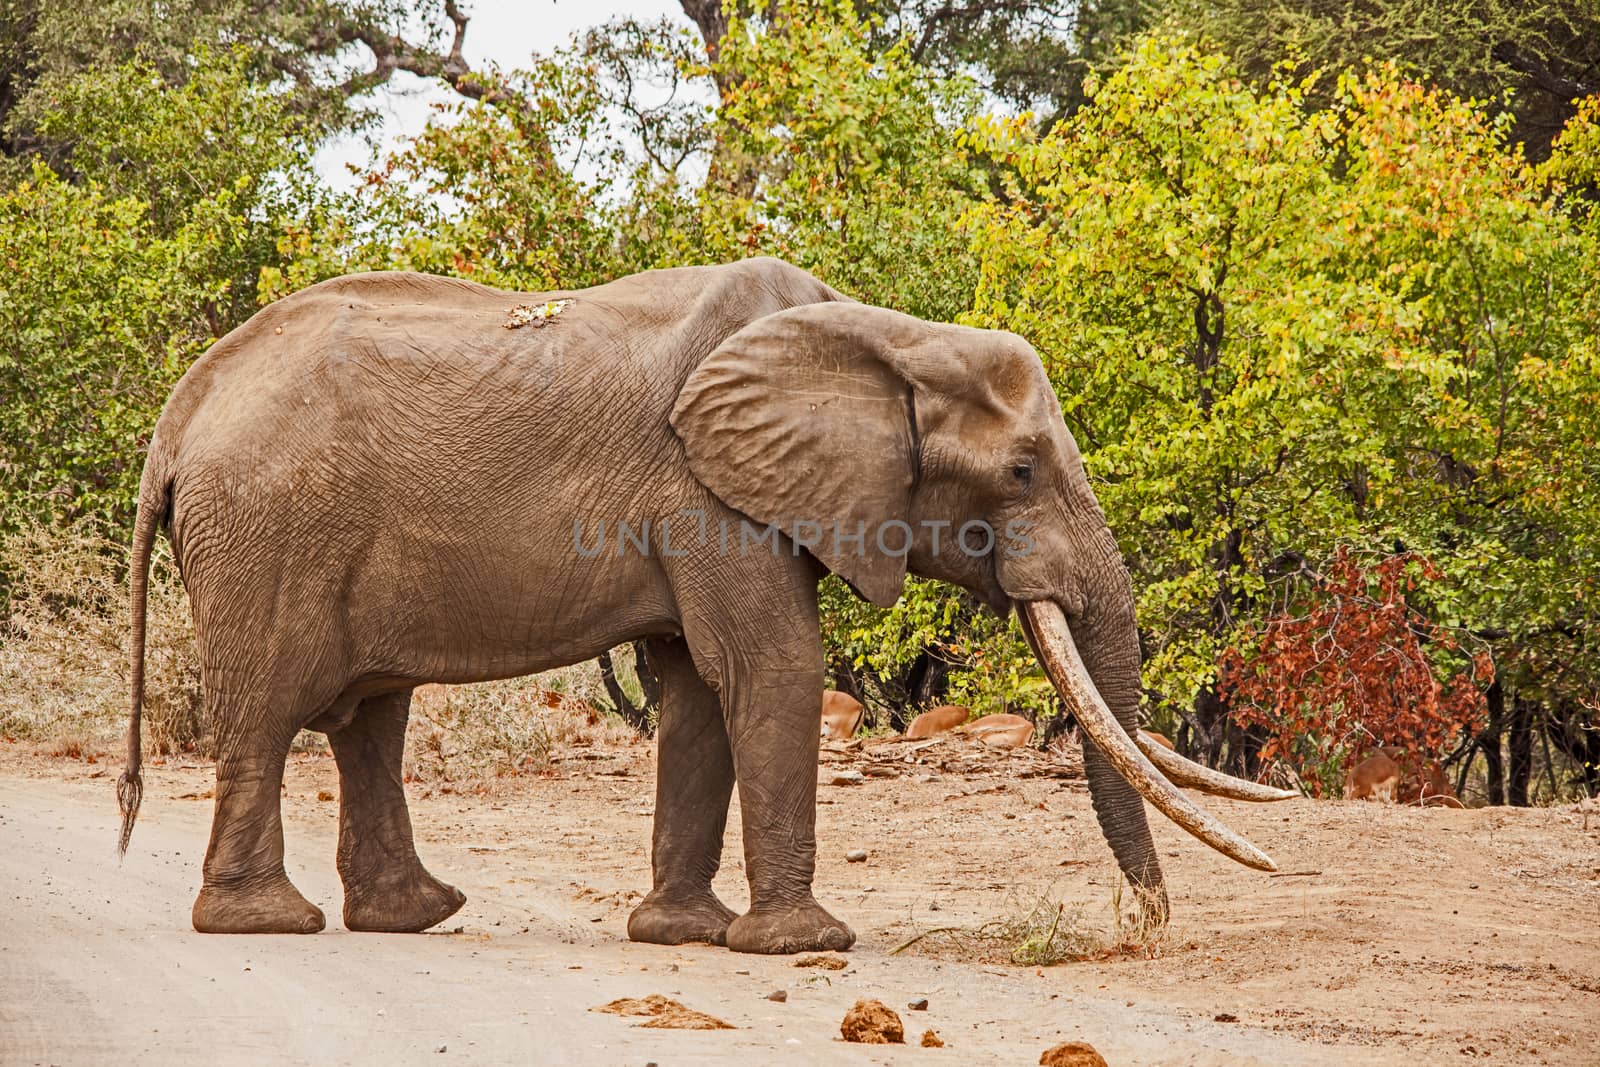 Mastulele, considered to be the leading tusker in Kruger National Park, South Africa.